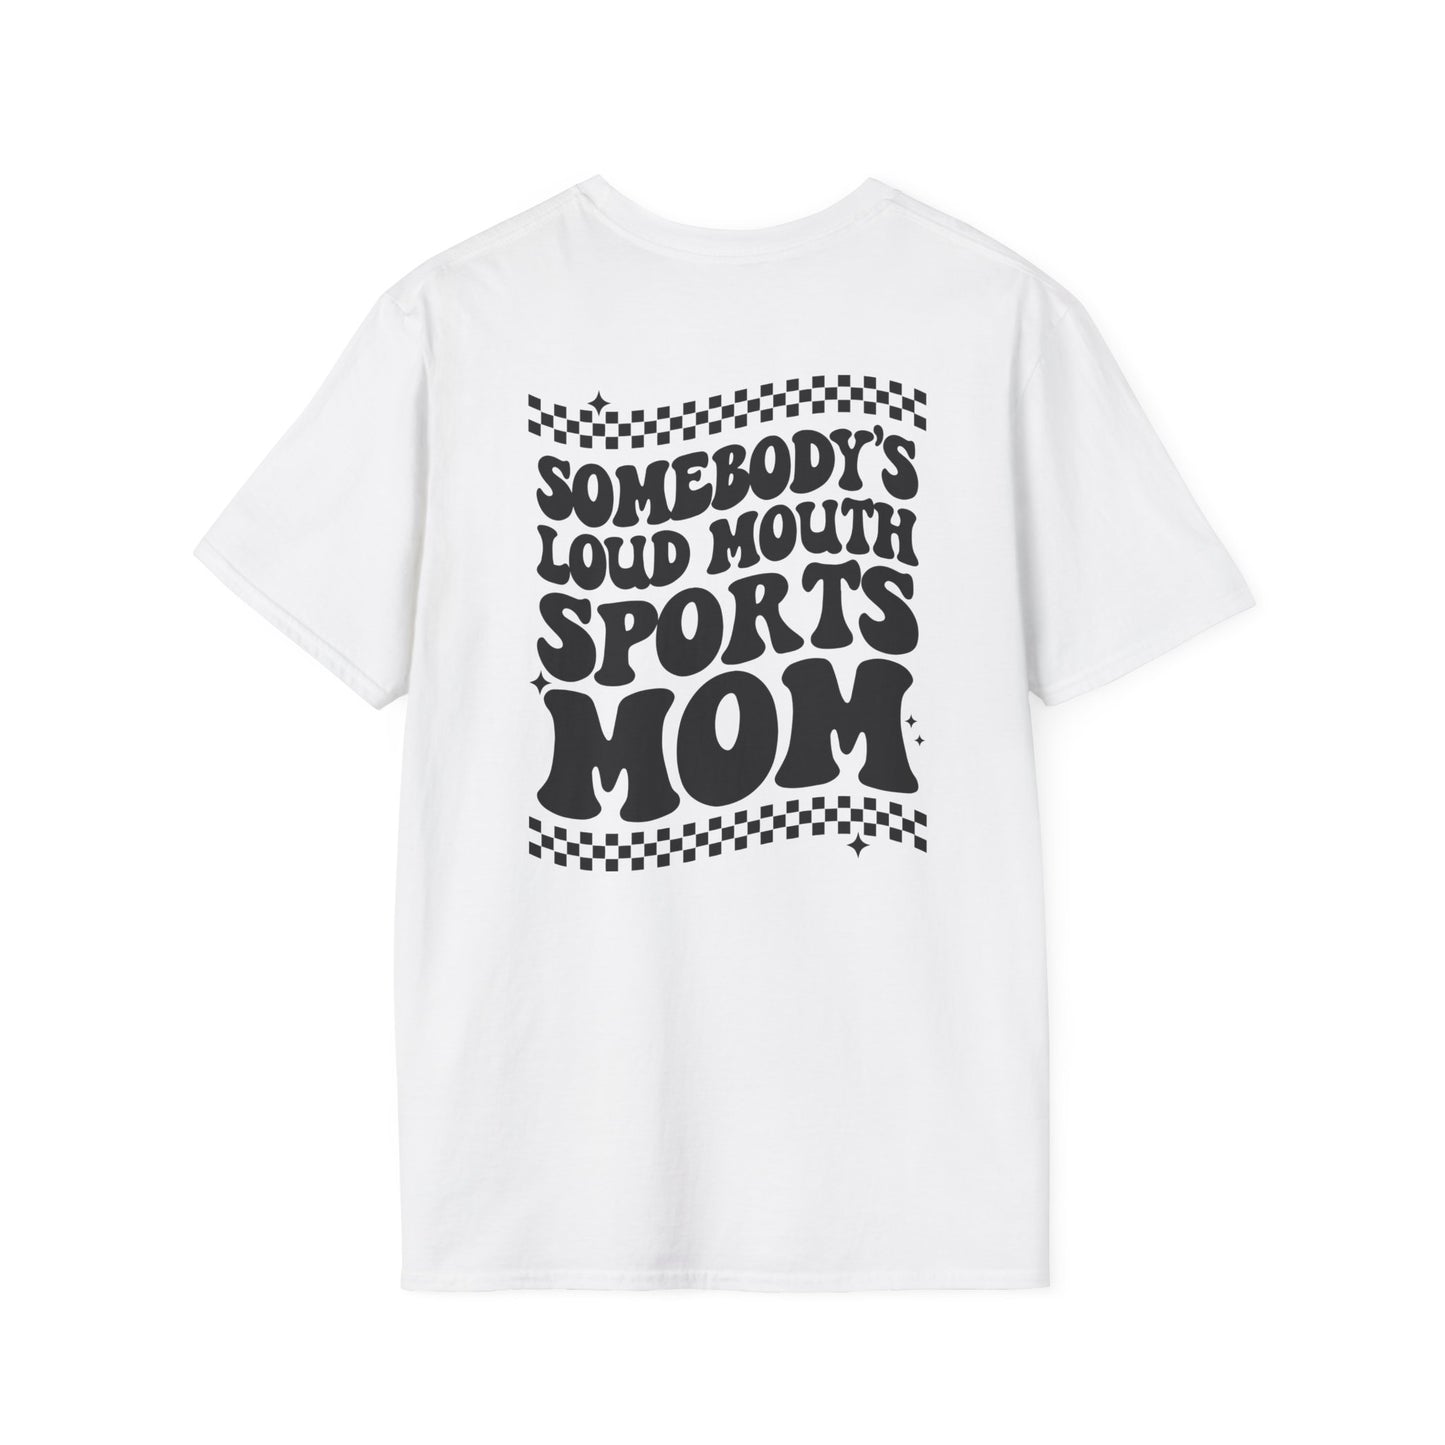 Loud Mouth Sports Mom - Unisex Softstyle T-Shirt